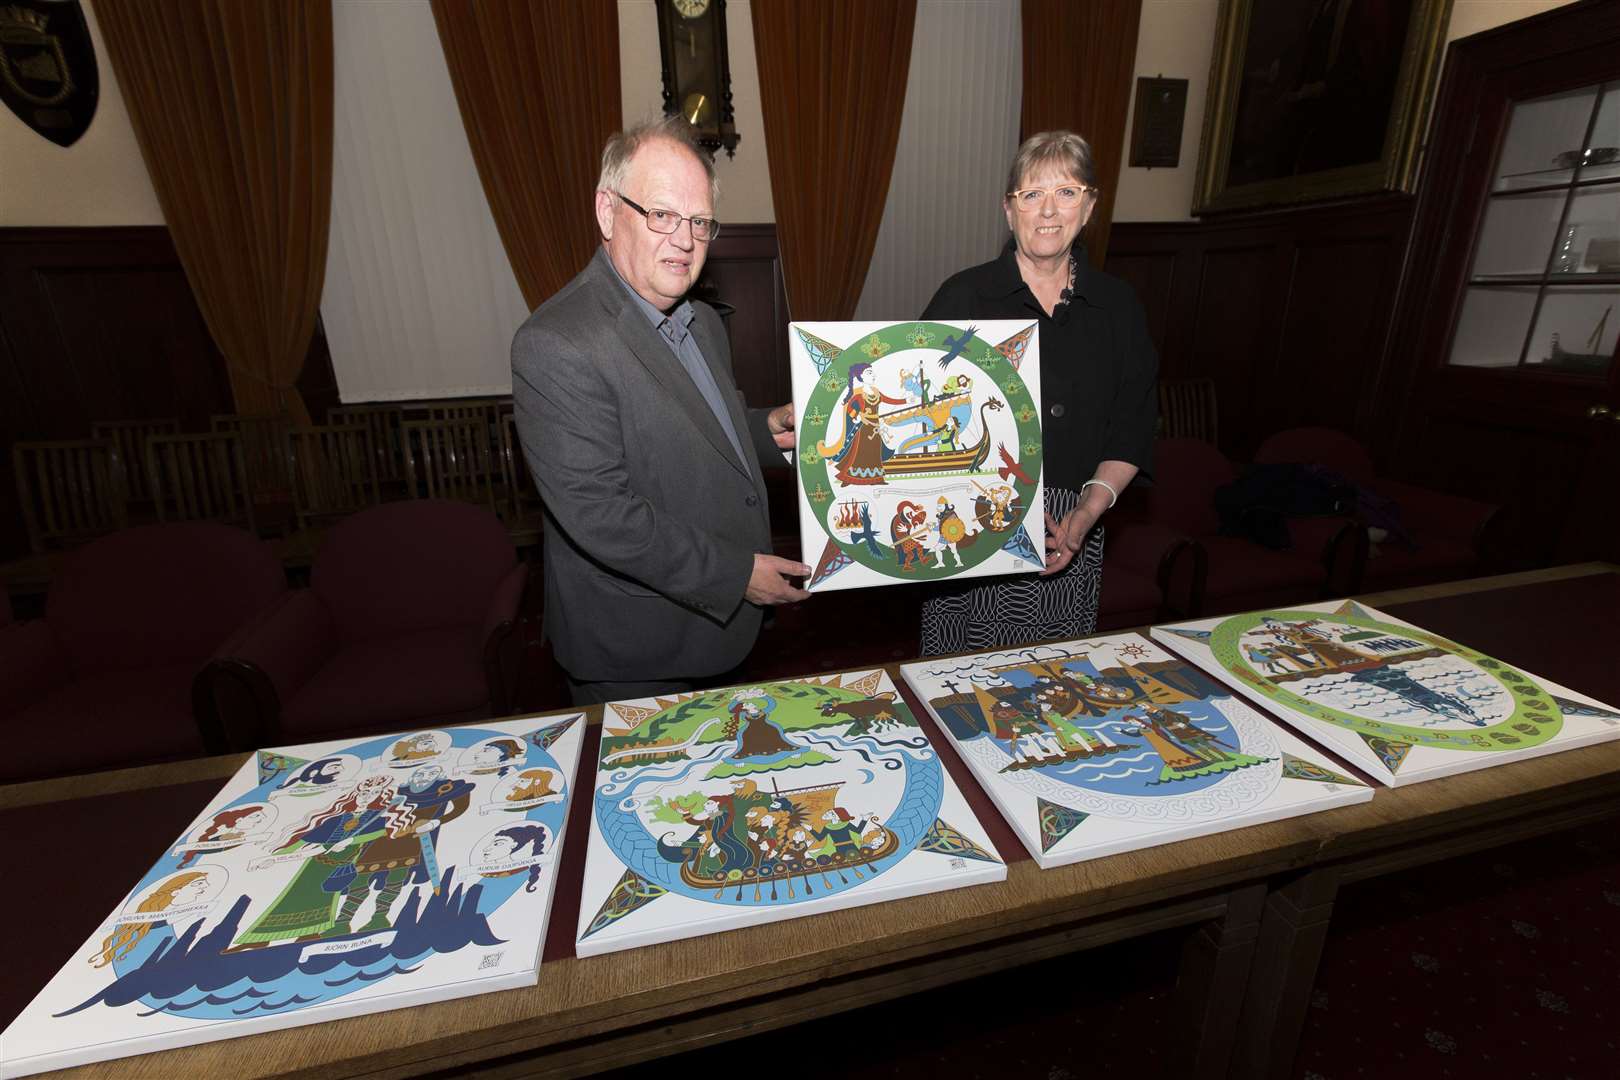 Iceland's contribution to the Scottish Diaspora Tapestry was unveiled in Wick Town Hall on Friday evening when Wick Society chairman Ian Leith accepted canvas prints of the embroidery panels from Bryndis Simonardottir, the Icelandic coordinator of the craftwork. Picture: Robert MacDonald / Northern Studios